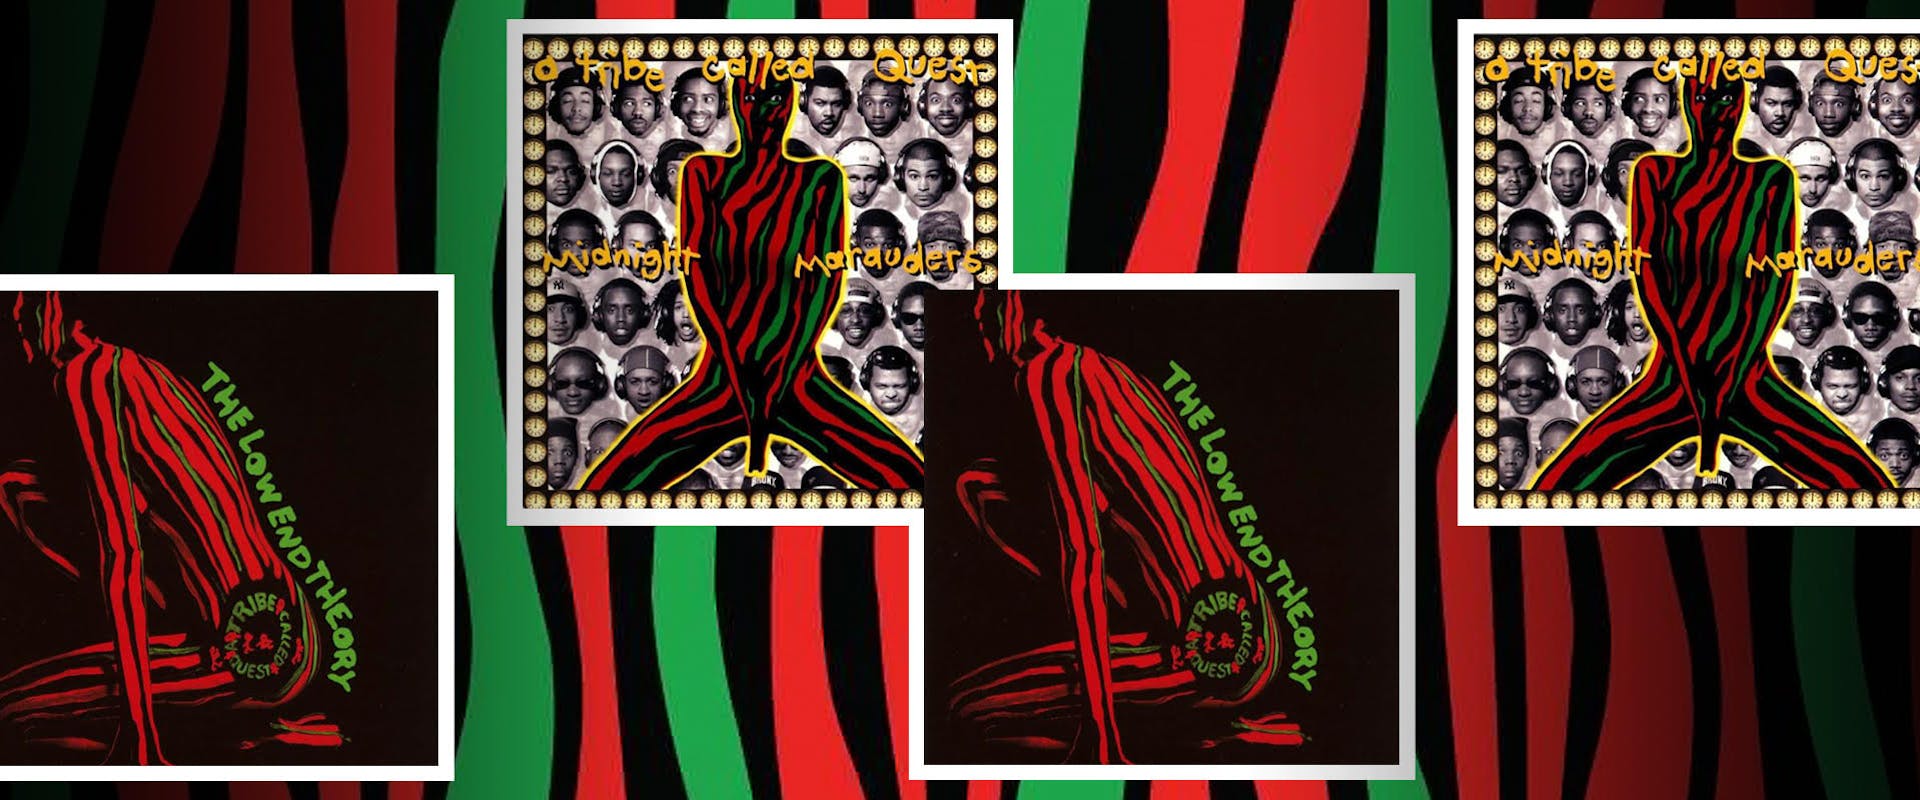 A collage of The Low End Theory and Midnight Marauders by A Tribe Called Quest.